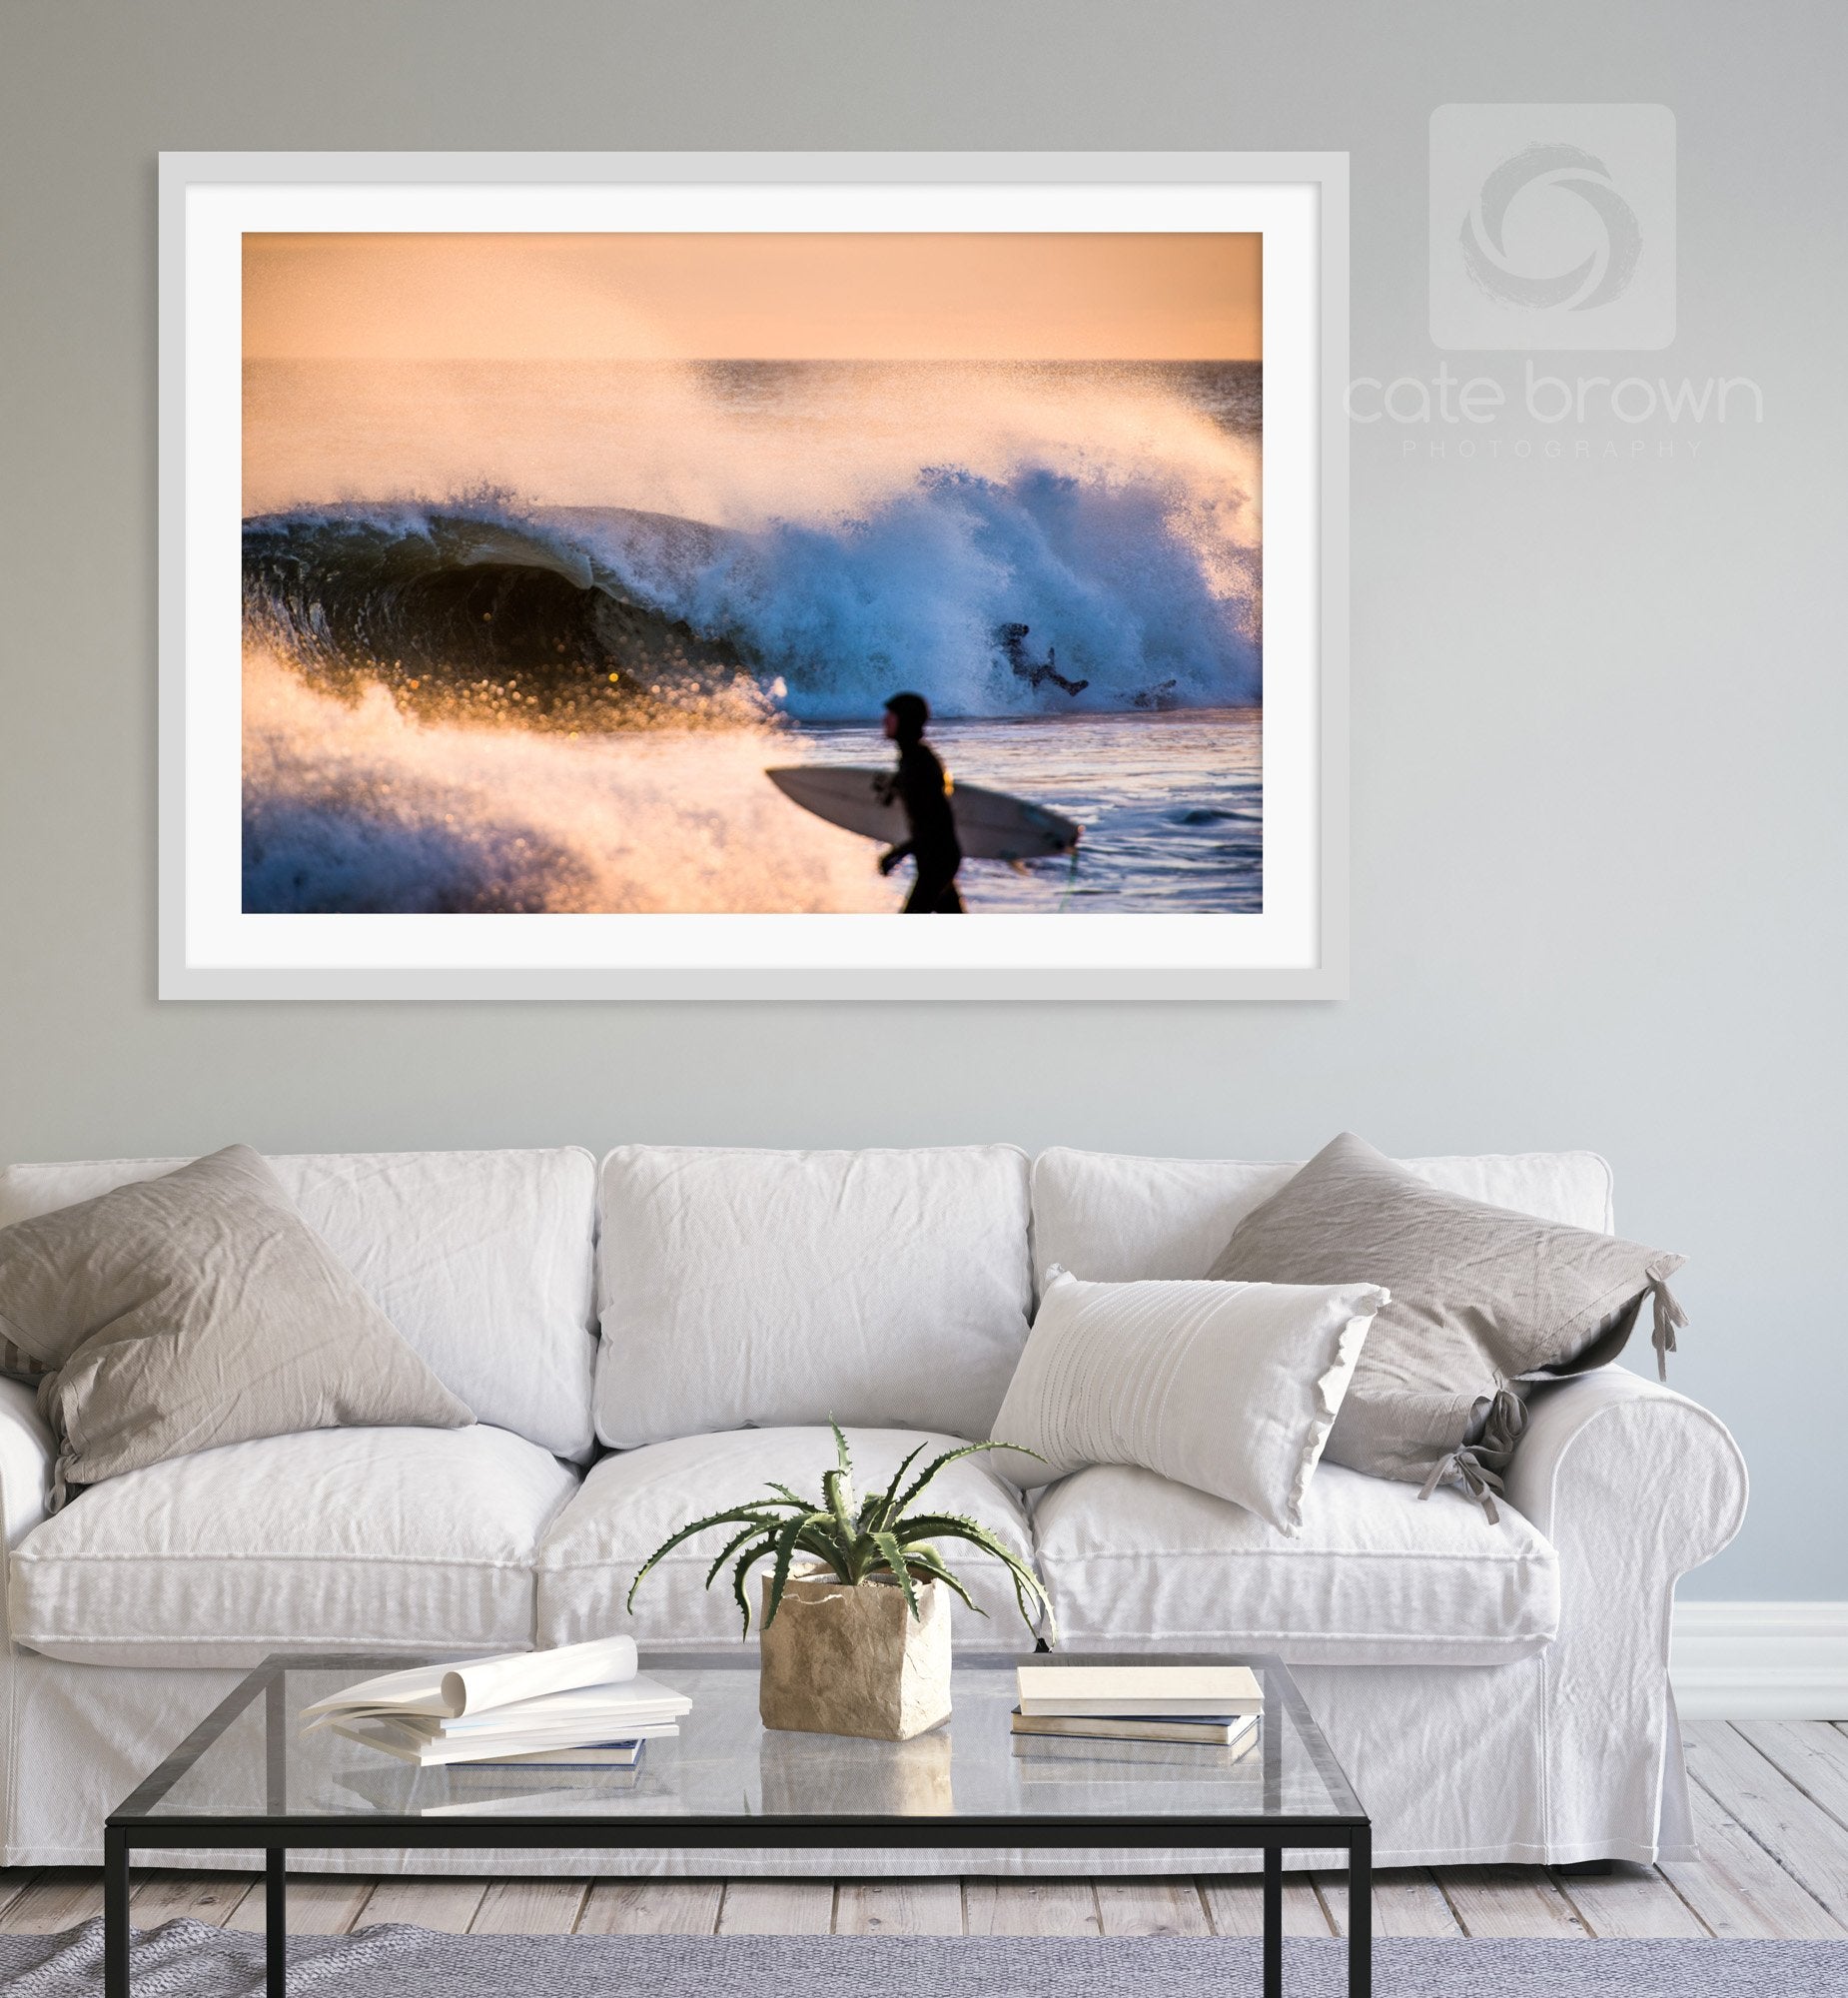 Cate Brown Photo Riley Sunset Surf #2 //  Surf Photography Made to Order Ocean Fine Art